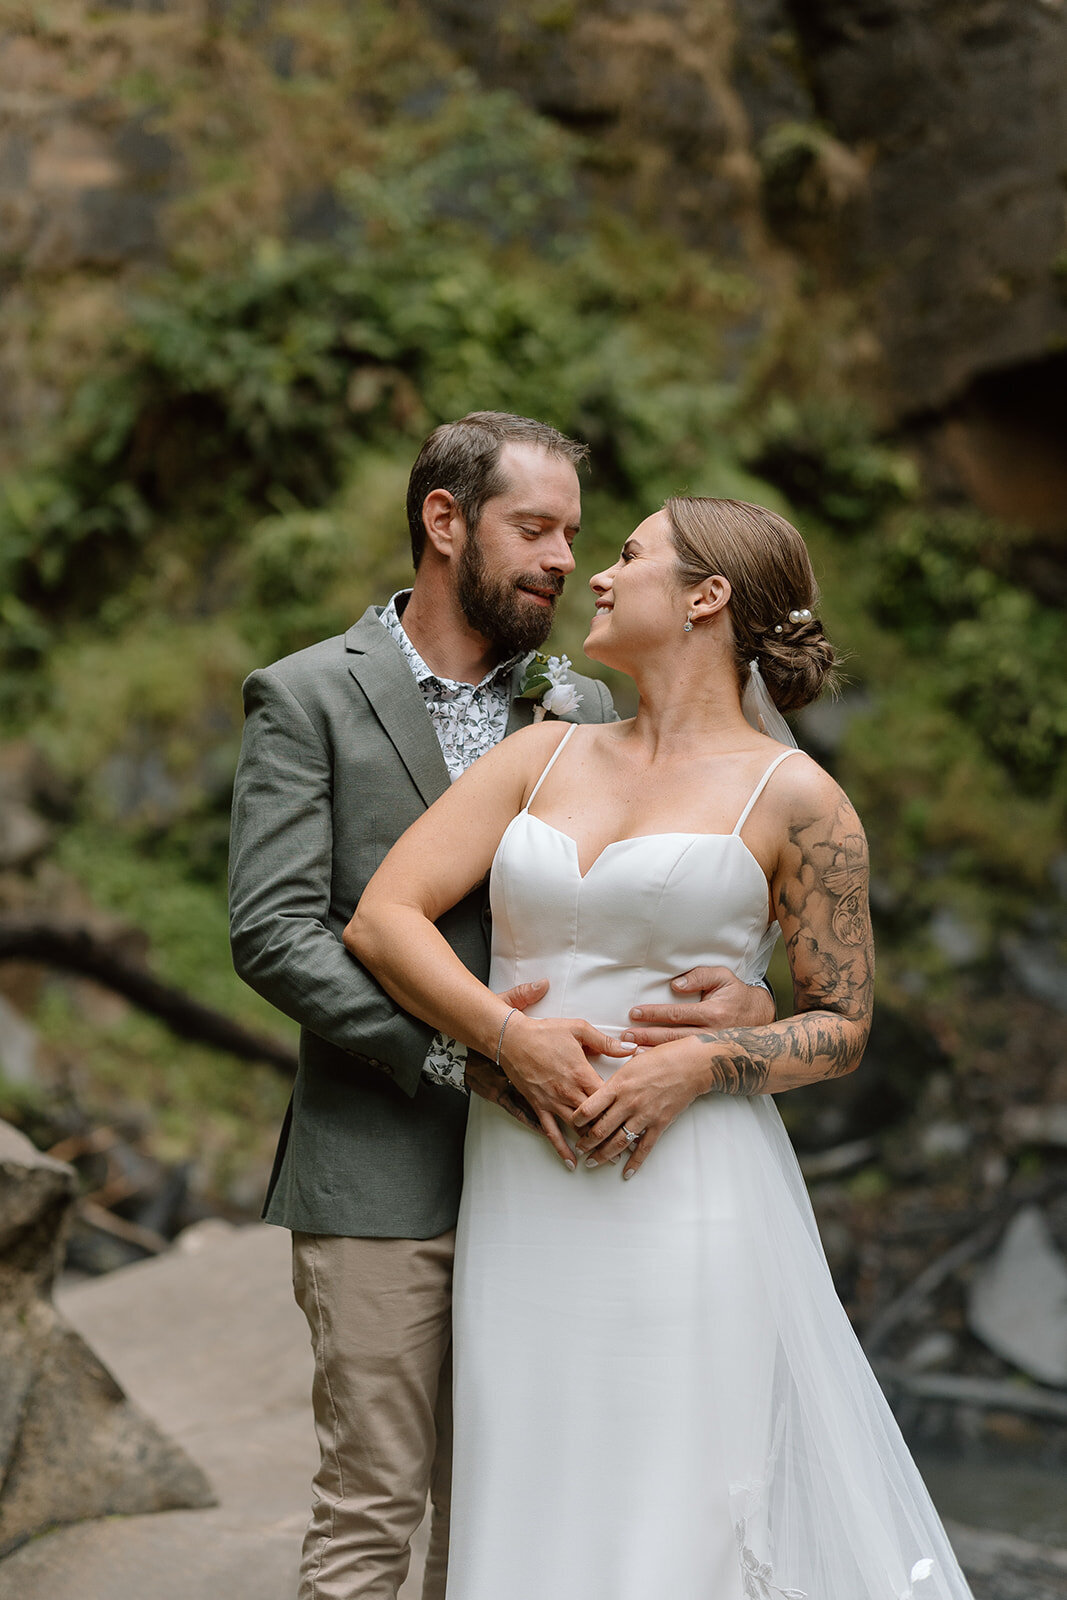 Stacey&Cory-Coast&Pines-235